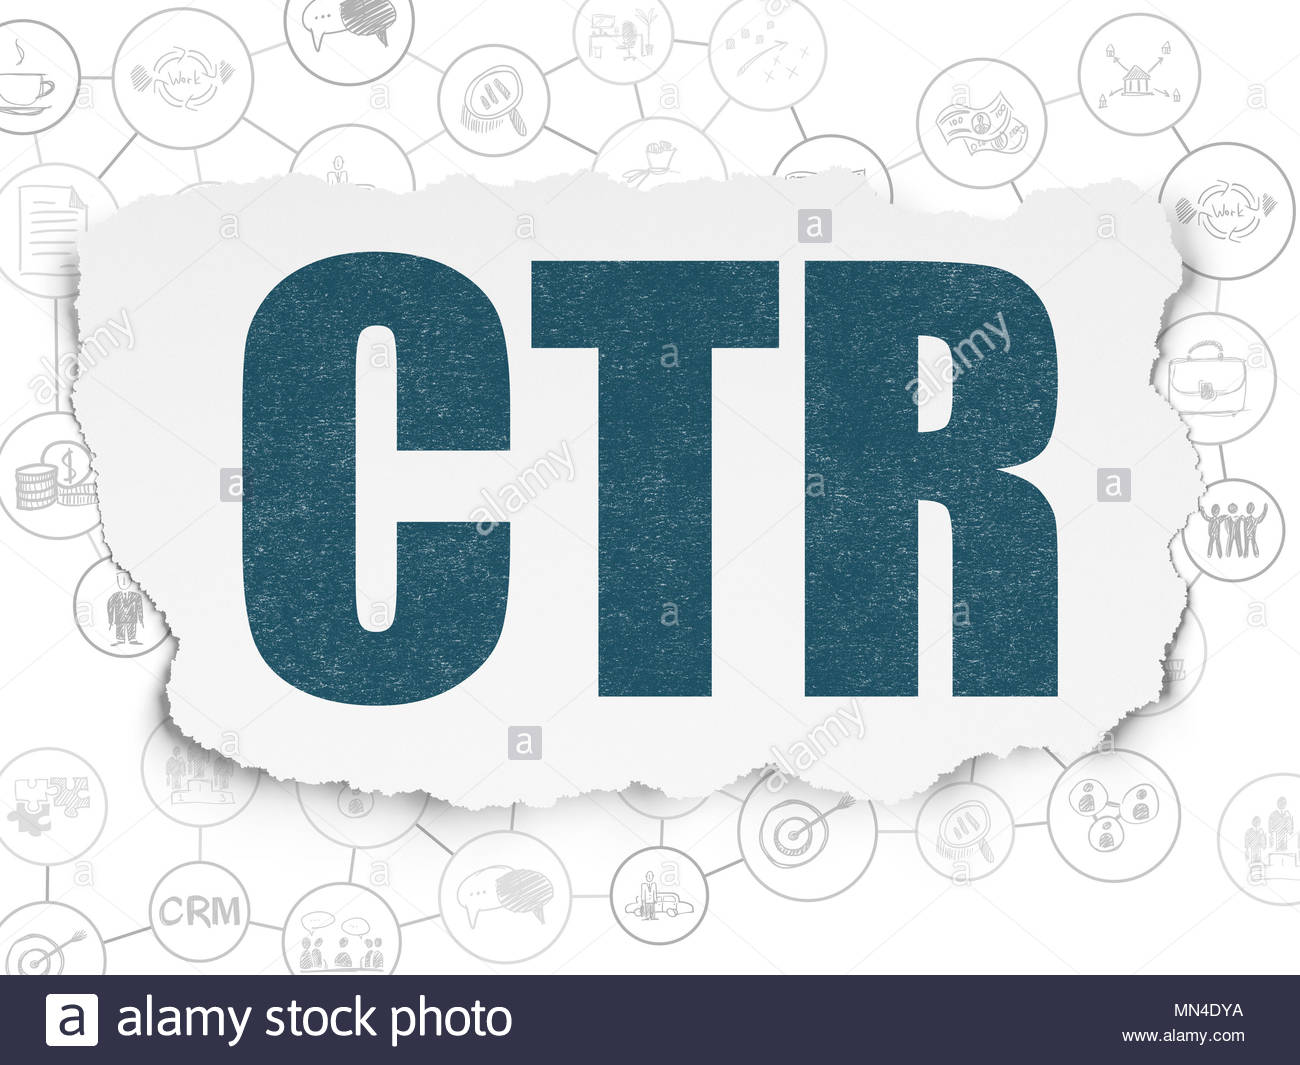 Business Concept Ctr On Torn Paper Background Stock Photo